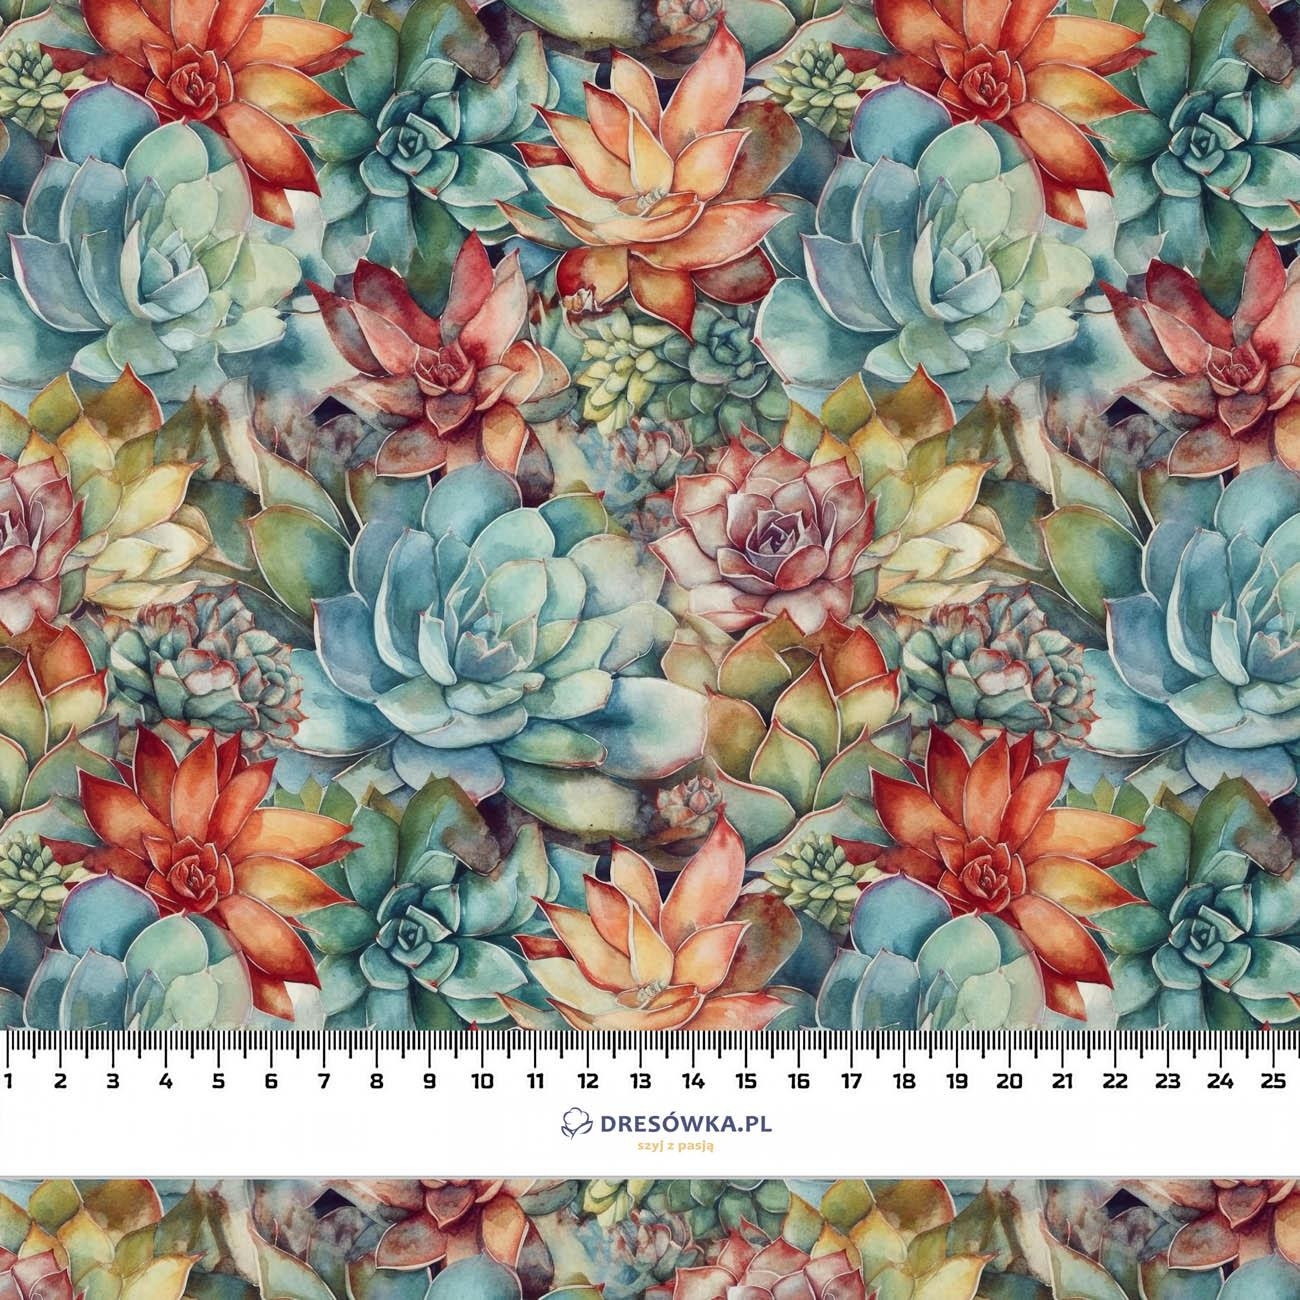 SUCCULENT PLANTS PAT. 7 - quick-drying woven fabric